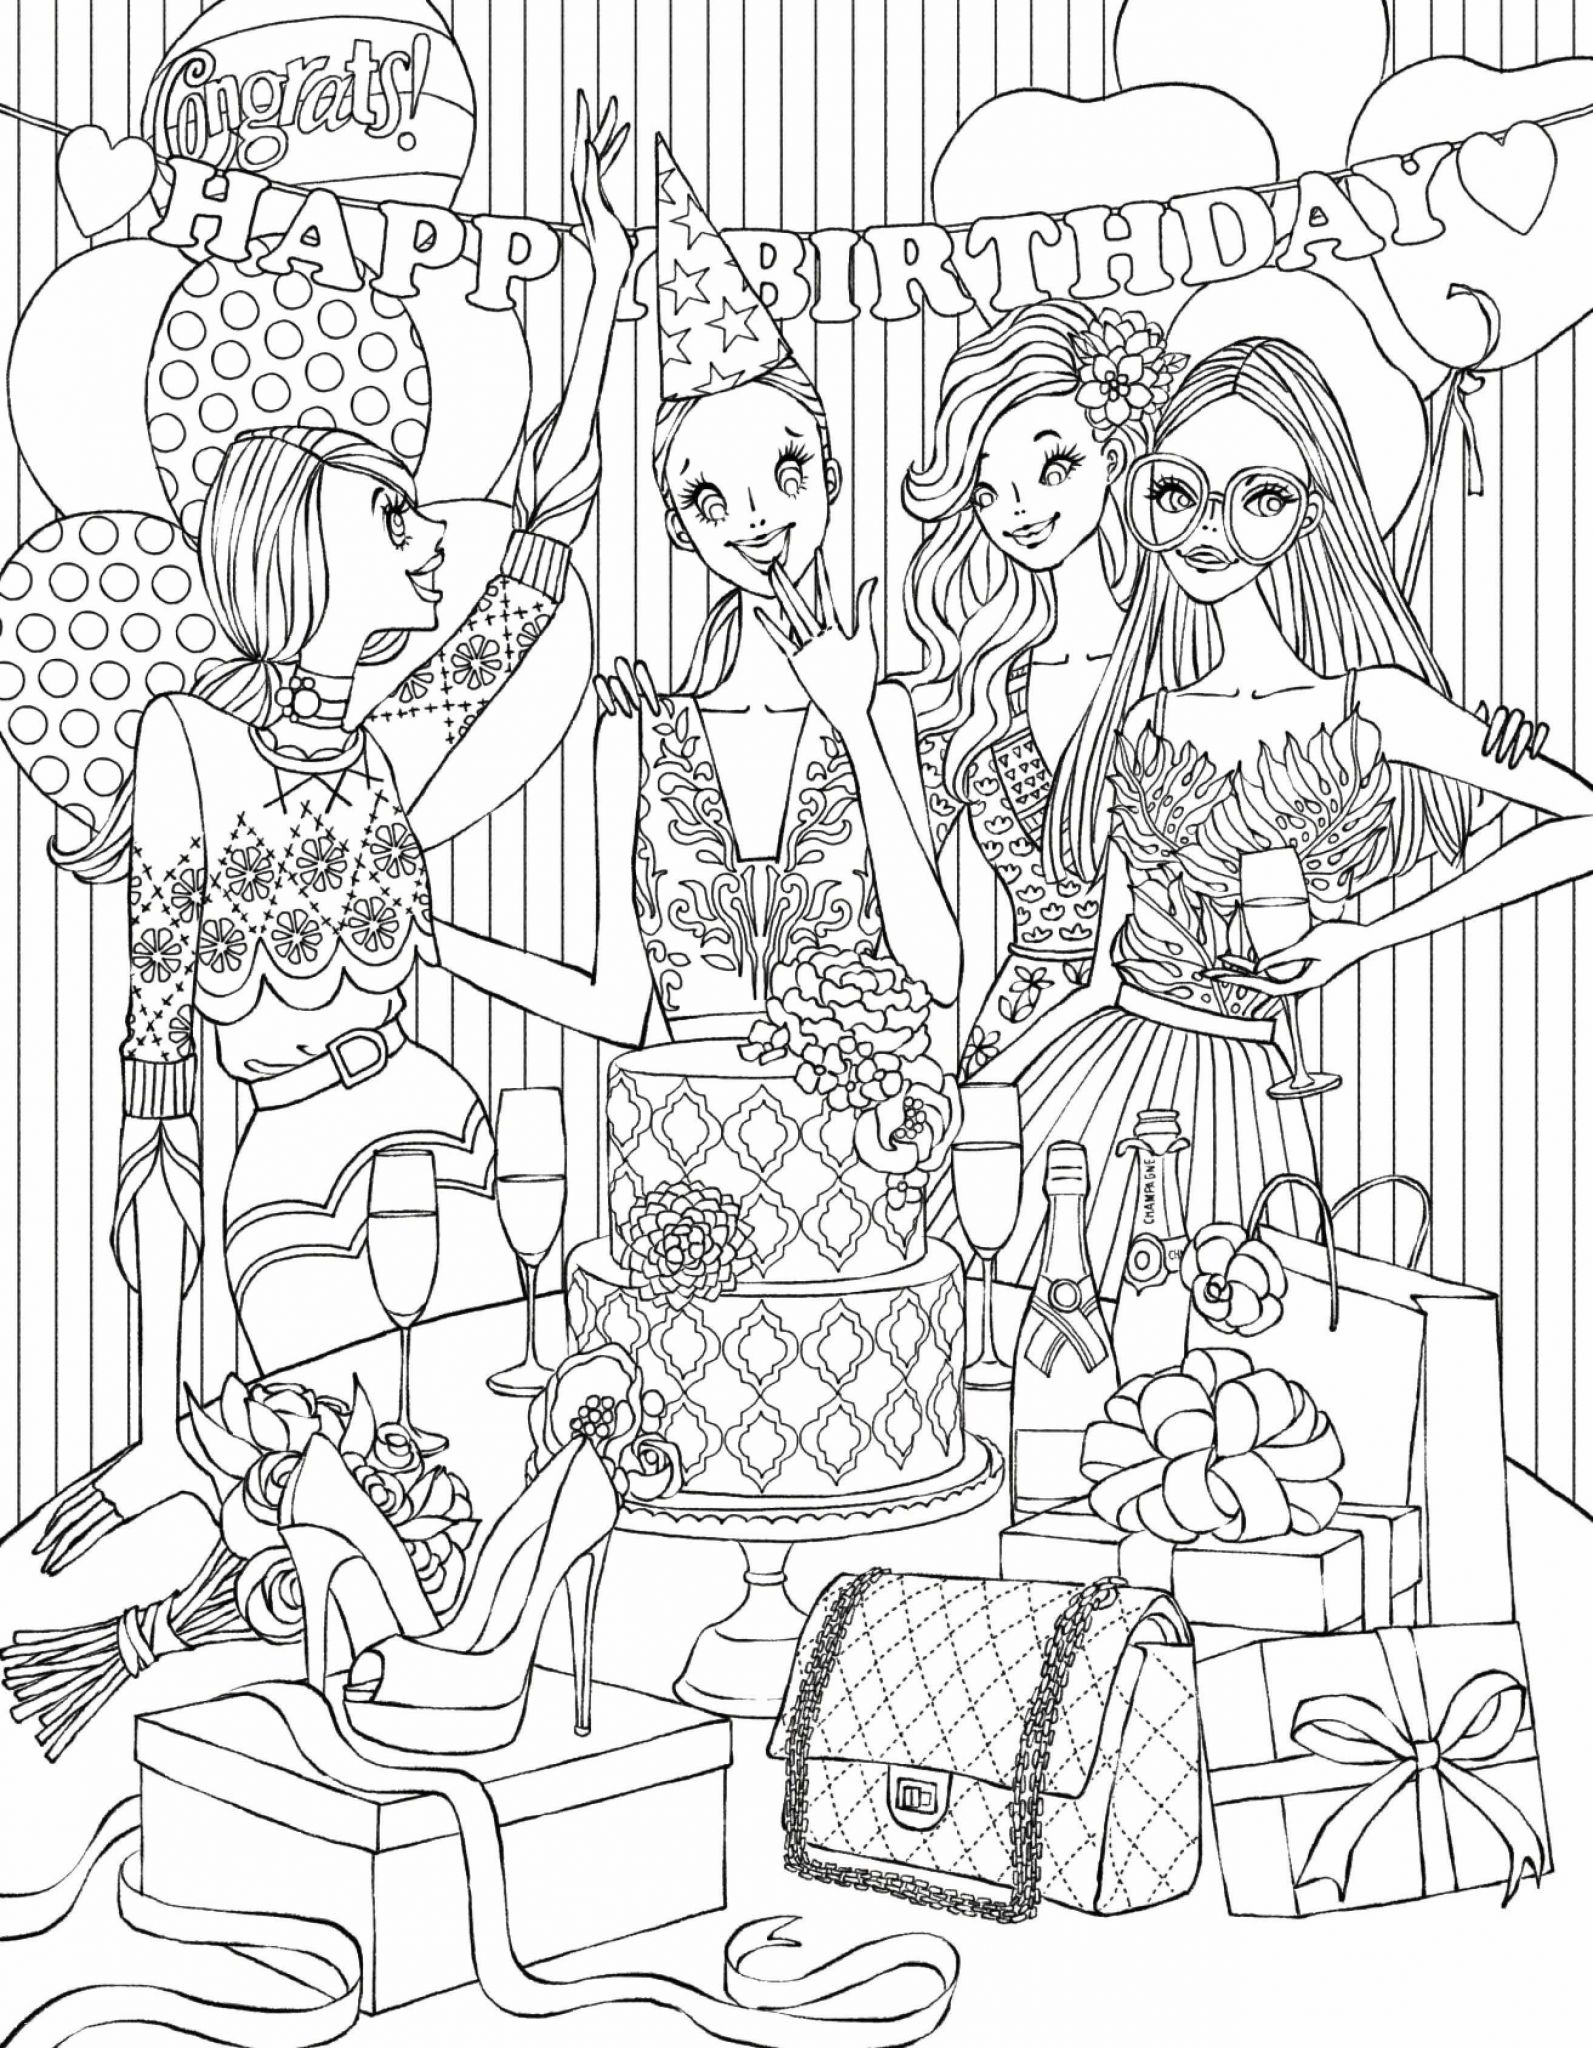 Coloring Worksheets for Preschool with Kindergarten Coloring Pages Luxury Printable Colering Beautiful